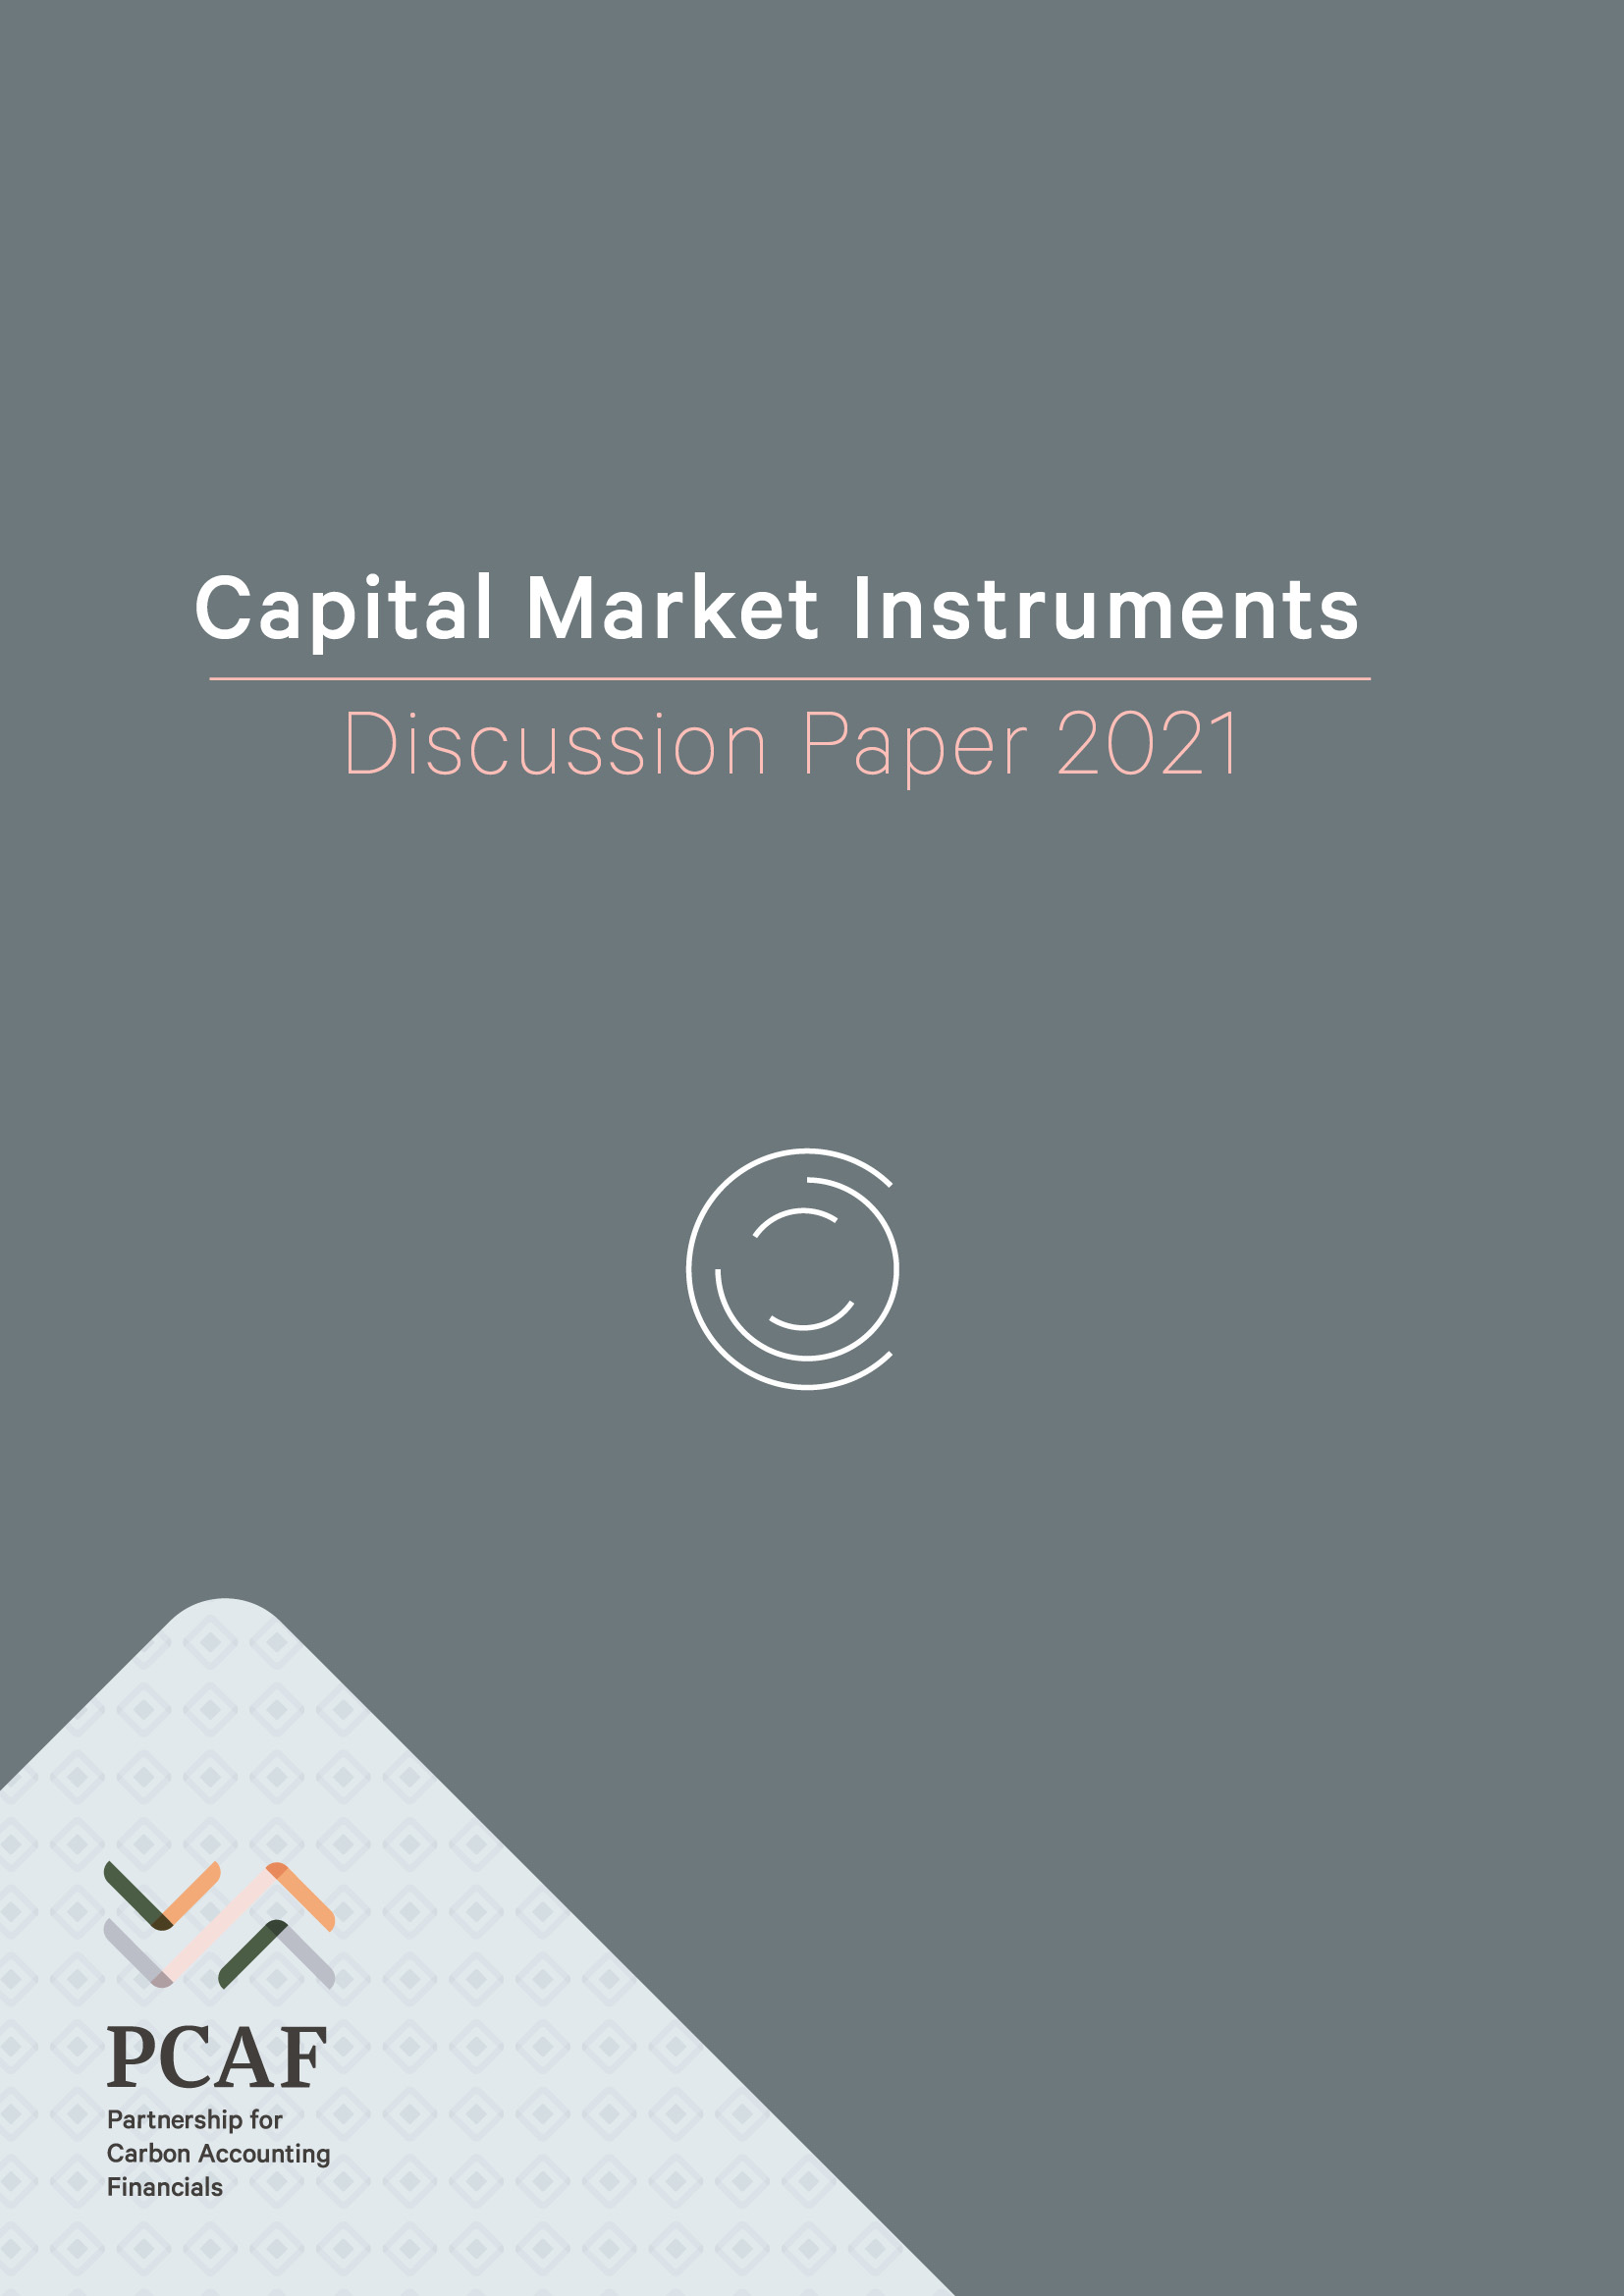 Discussion paper on capital market instruments cover page